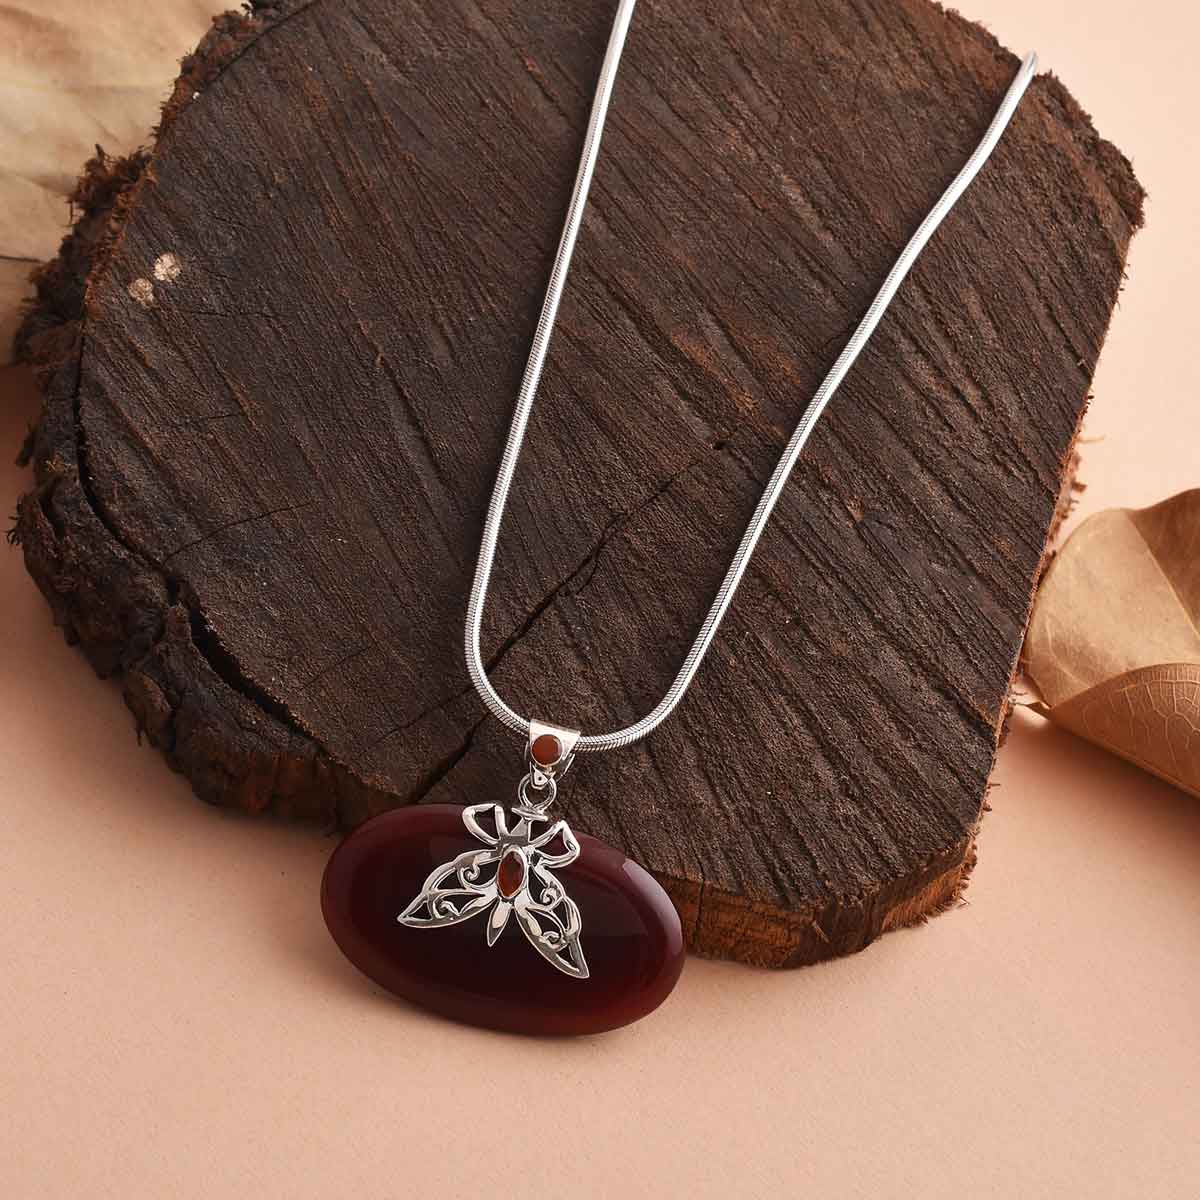 Carnelian Sterling Silver Pendant - Discovering Great Gifts for Your Wife